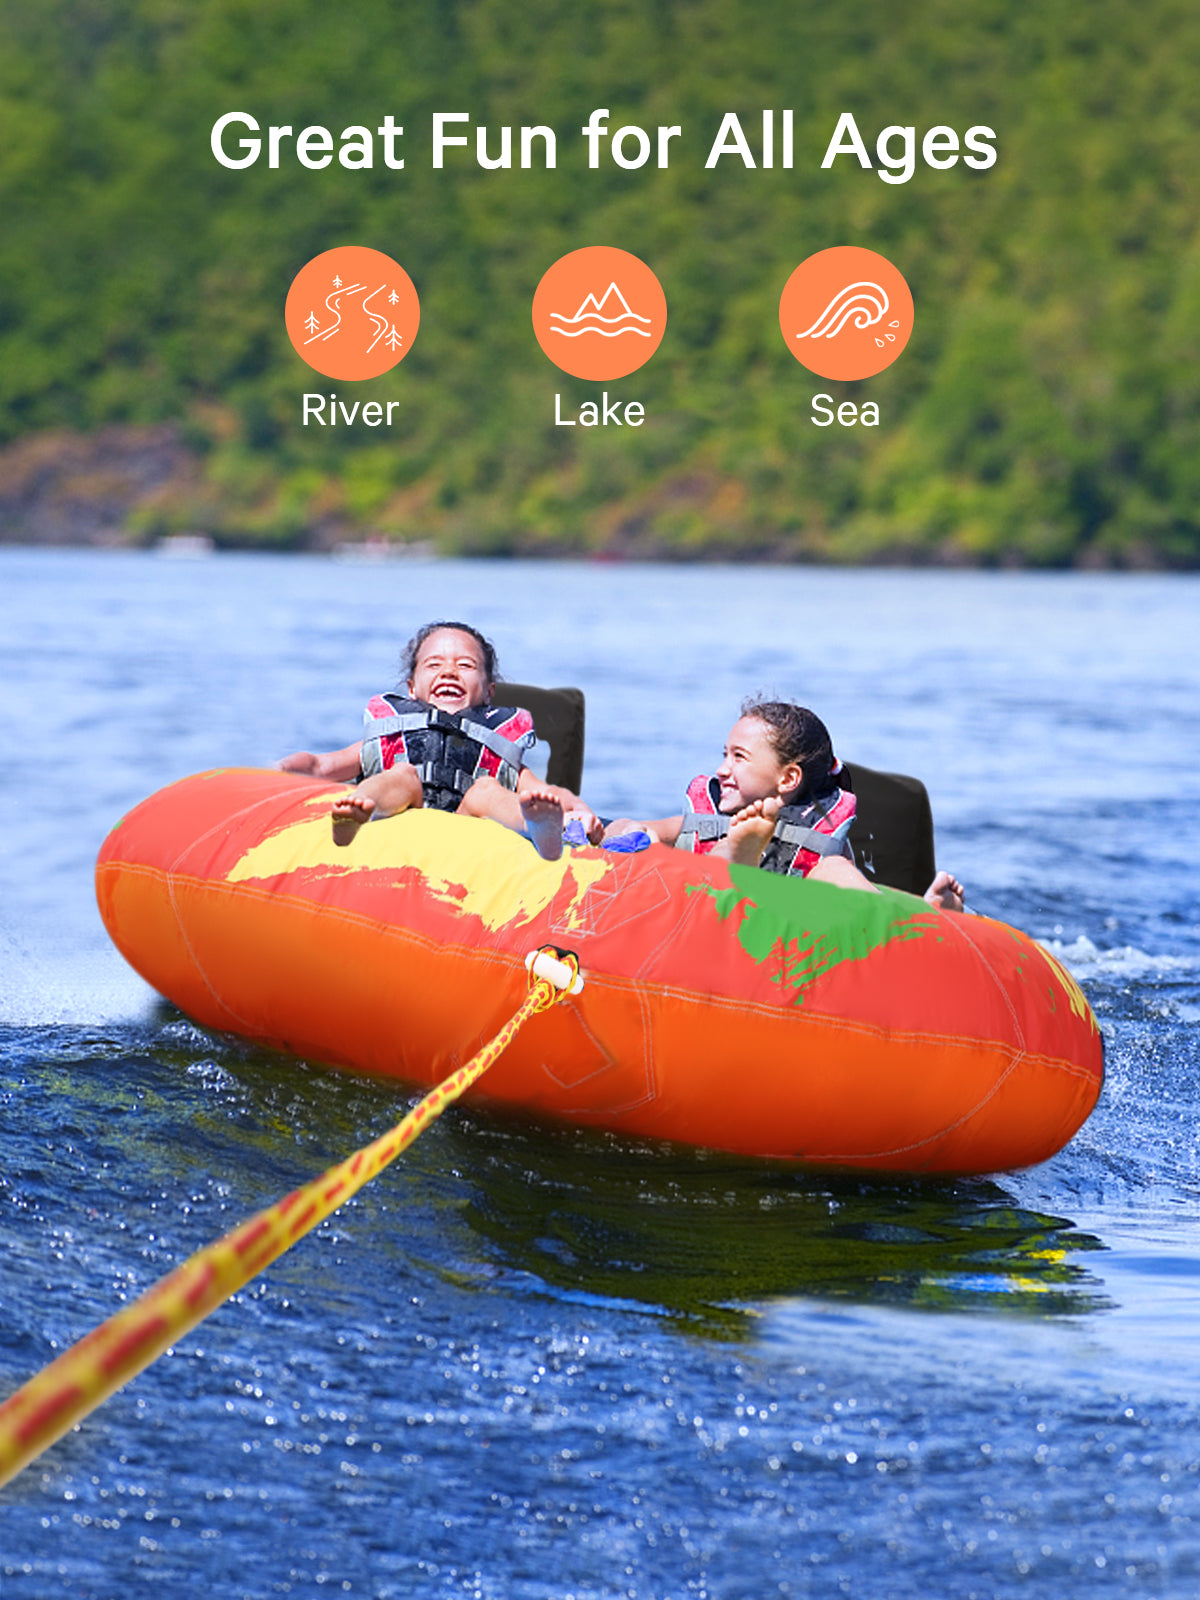 Load image into Gallery viewer, Towable Tube for Boating 2 Rider for Youth &amp; Adult Have Fun in Outdoor - Orange
